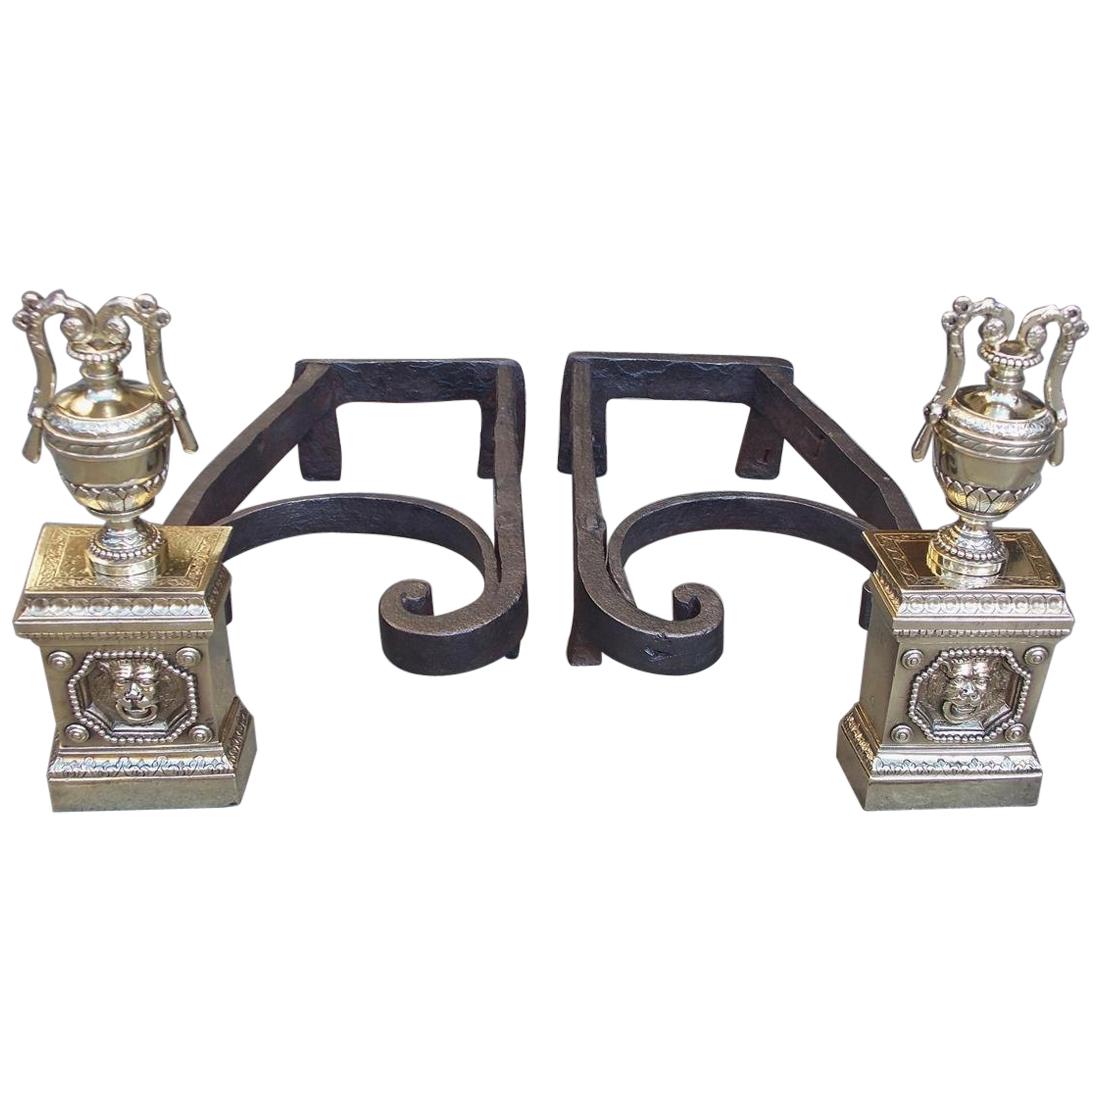 Pair of French Brass and Wrought Iron Lion and Foliage Urn Andirons, Circa 1790 For Sale